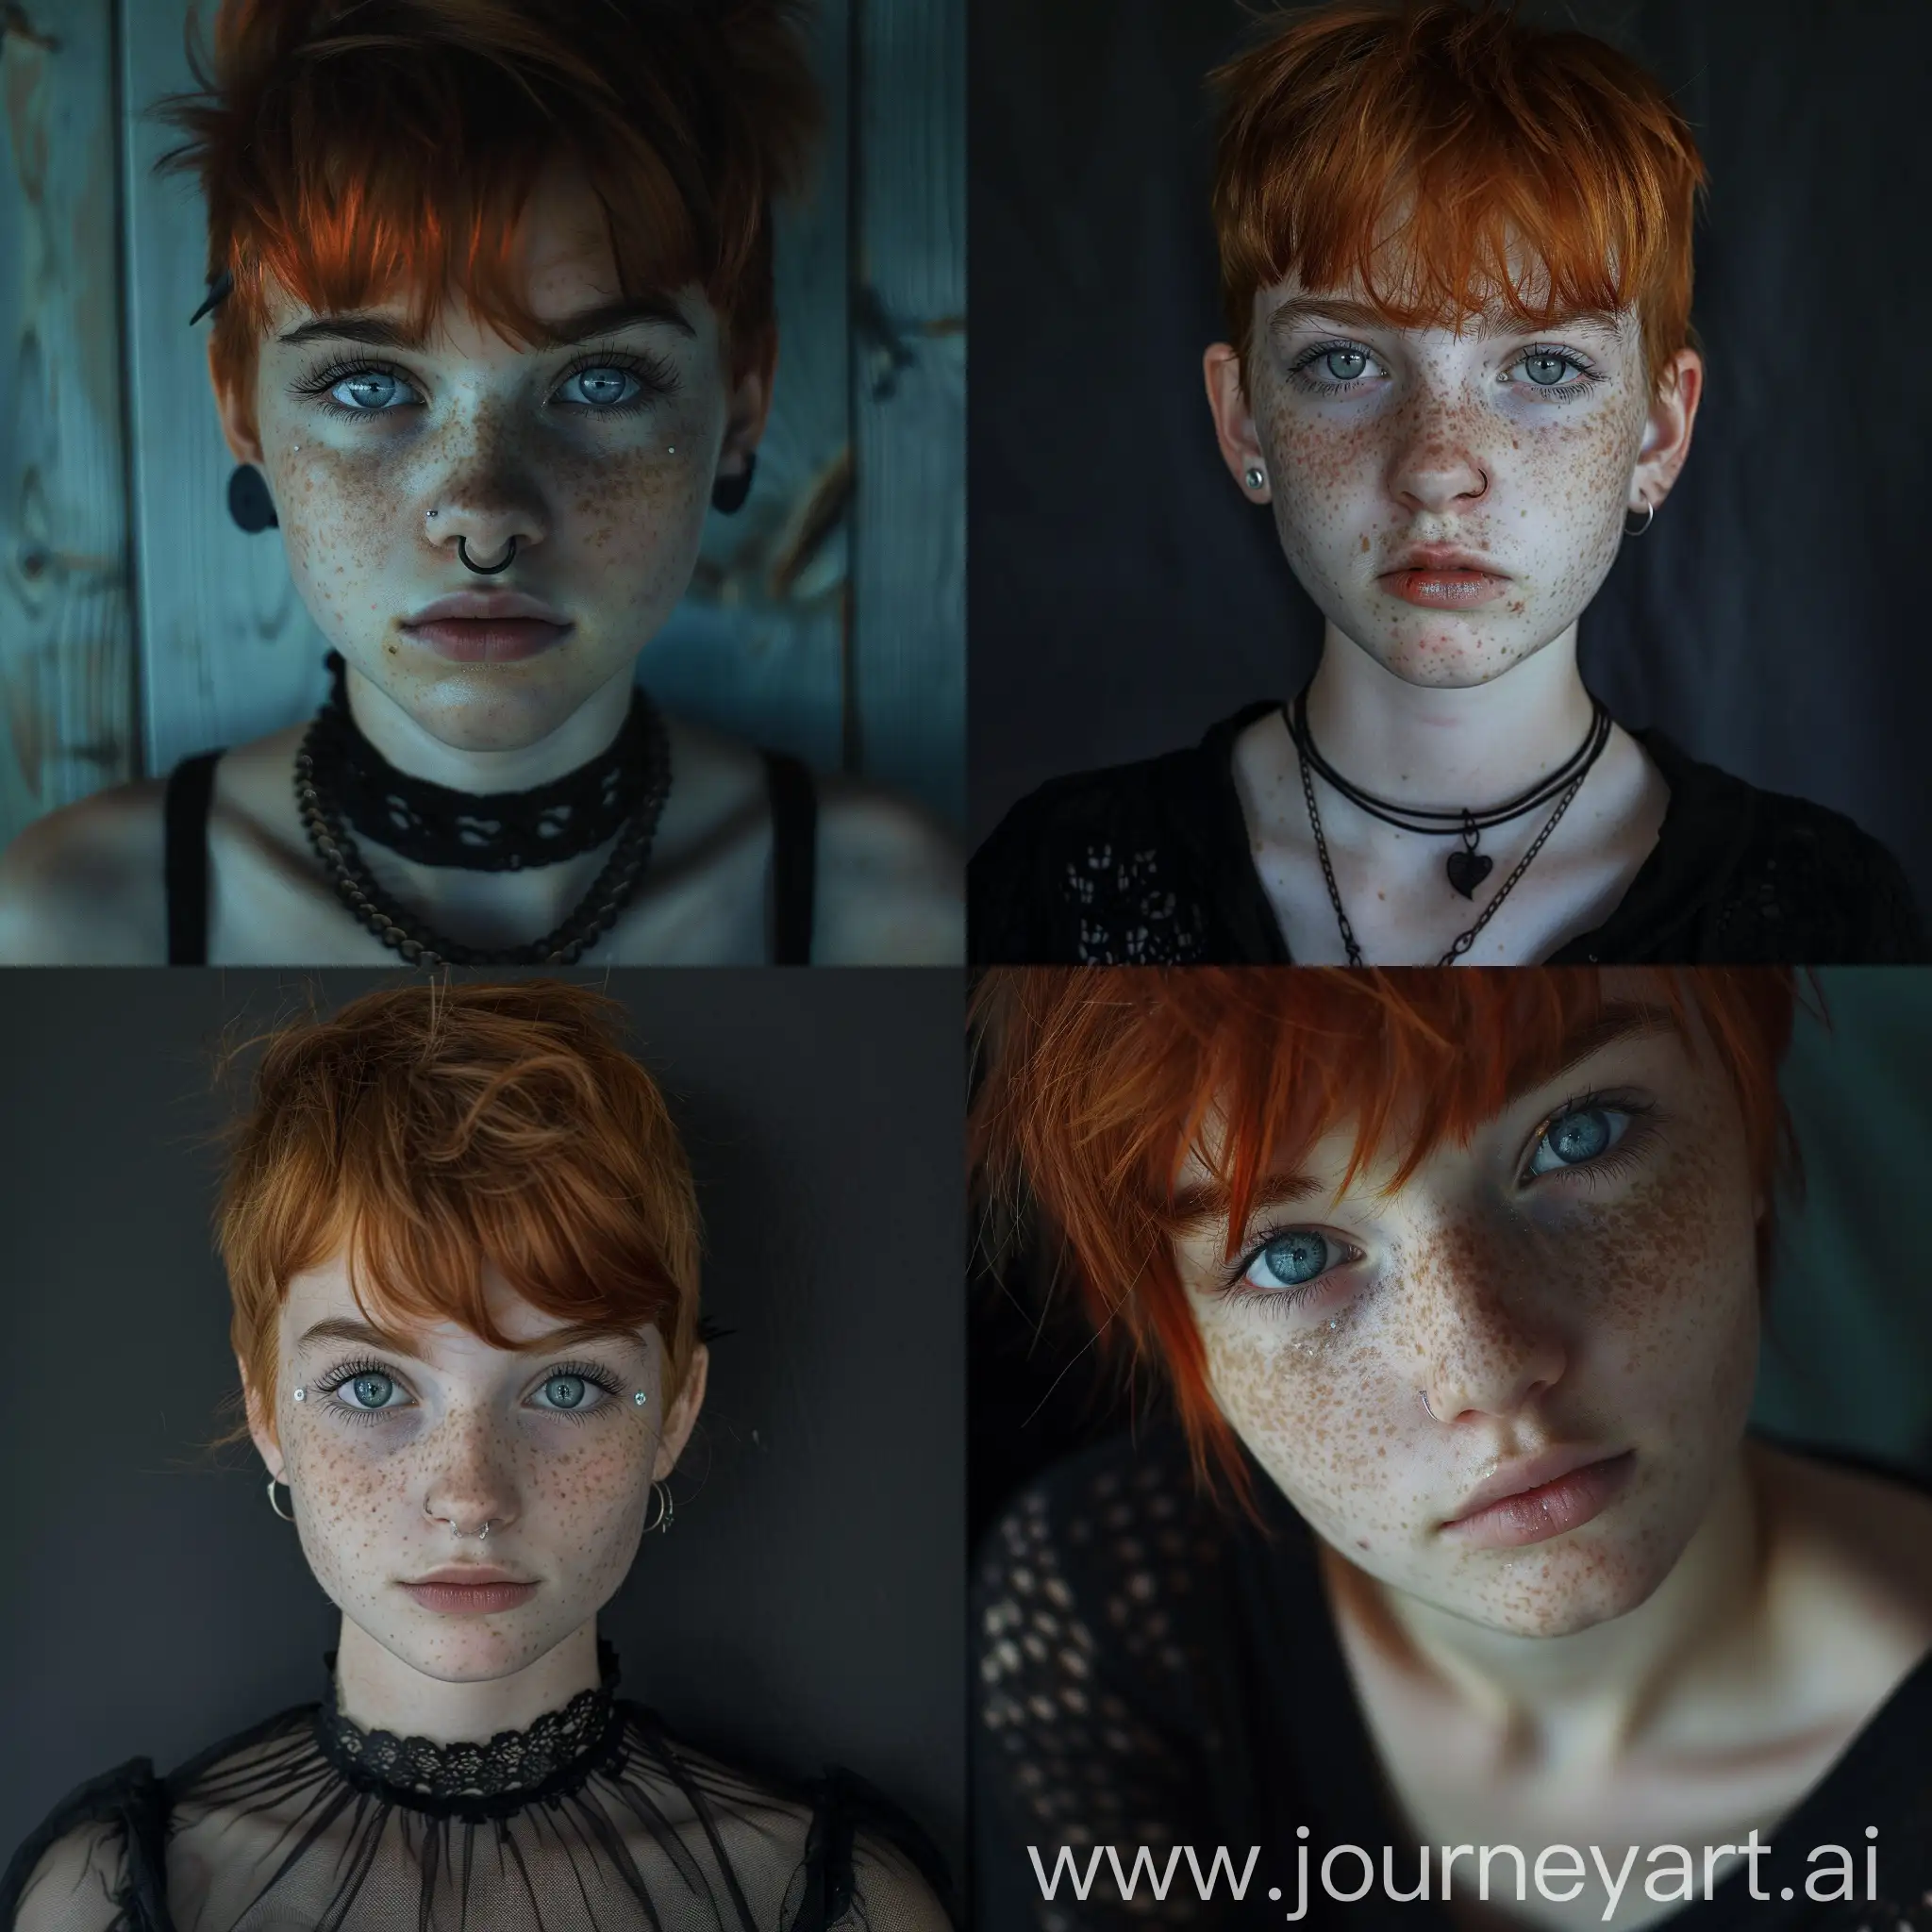 16 year old girl, goth, pixie cut, red hair, freckles, icy blue eyes